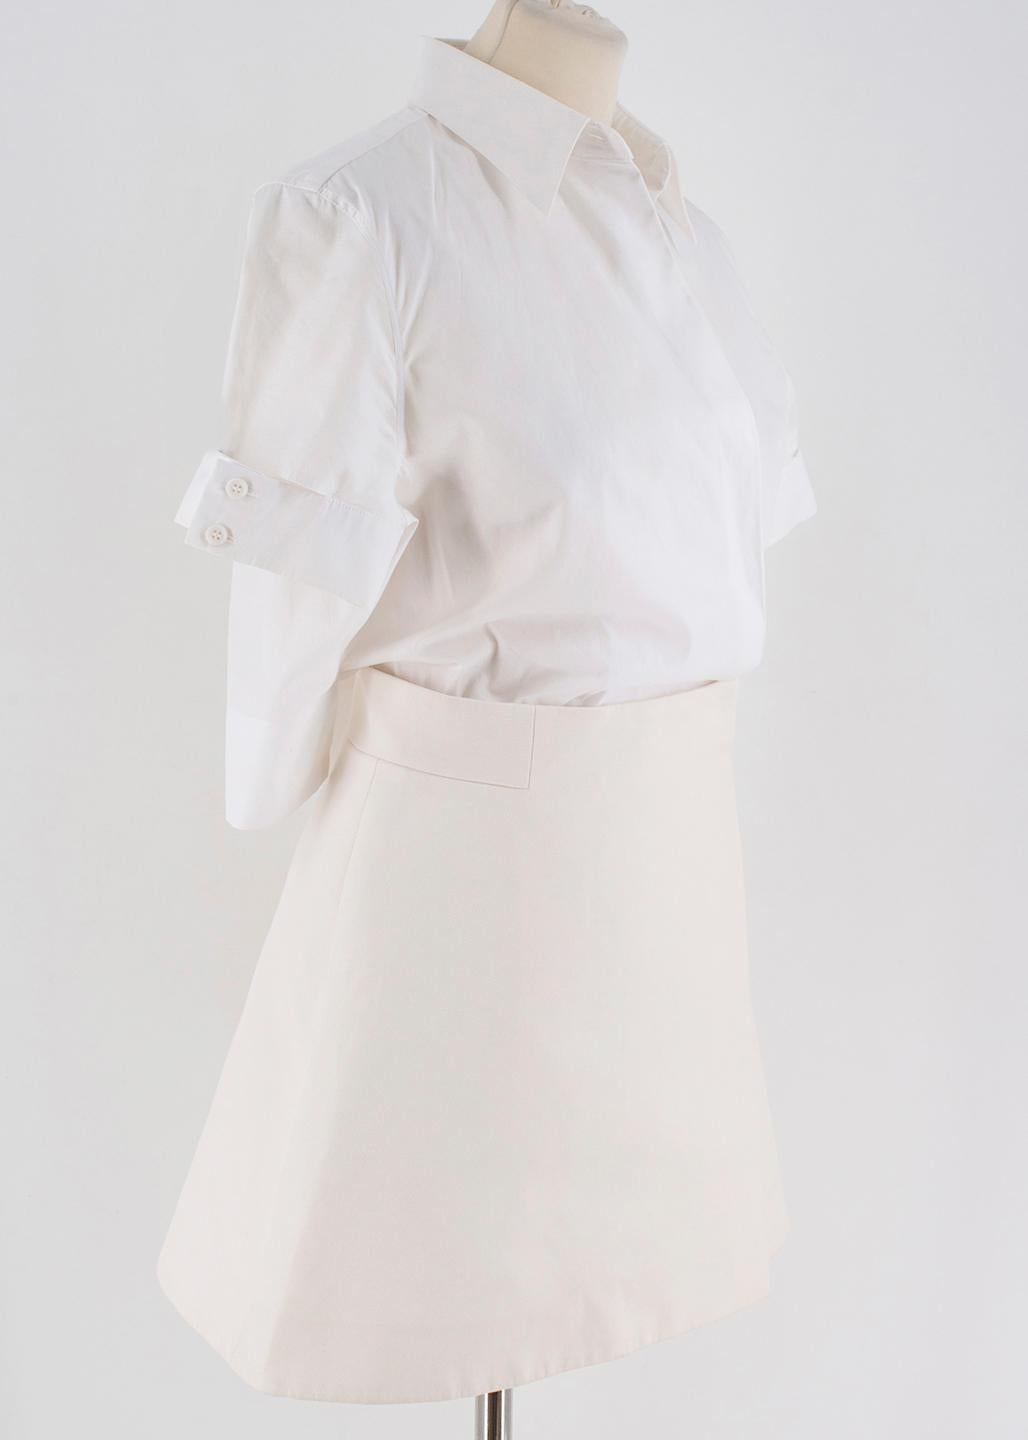 Victoria Beckham A-line Shirt Dress 

- A-line Shirt Dress
- Open Lapel Top
- Short Sleeved, buttoned 
- Beige Wrap Skirt Bottom
- Hook-and-eye clasp 
- 100% Cotton

Please note, these items are pre-owned and may show some signs of storage, even